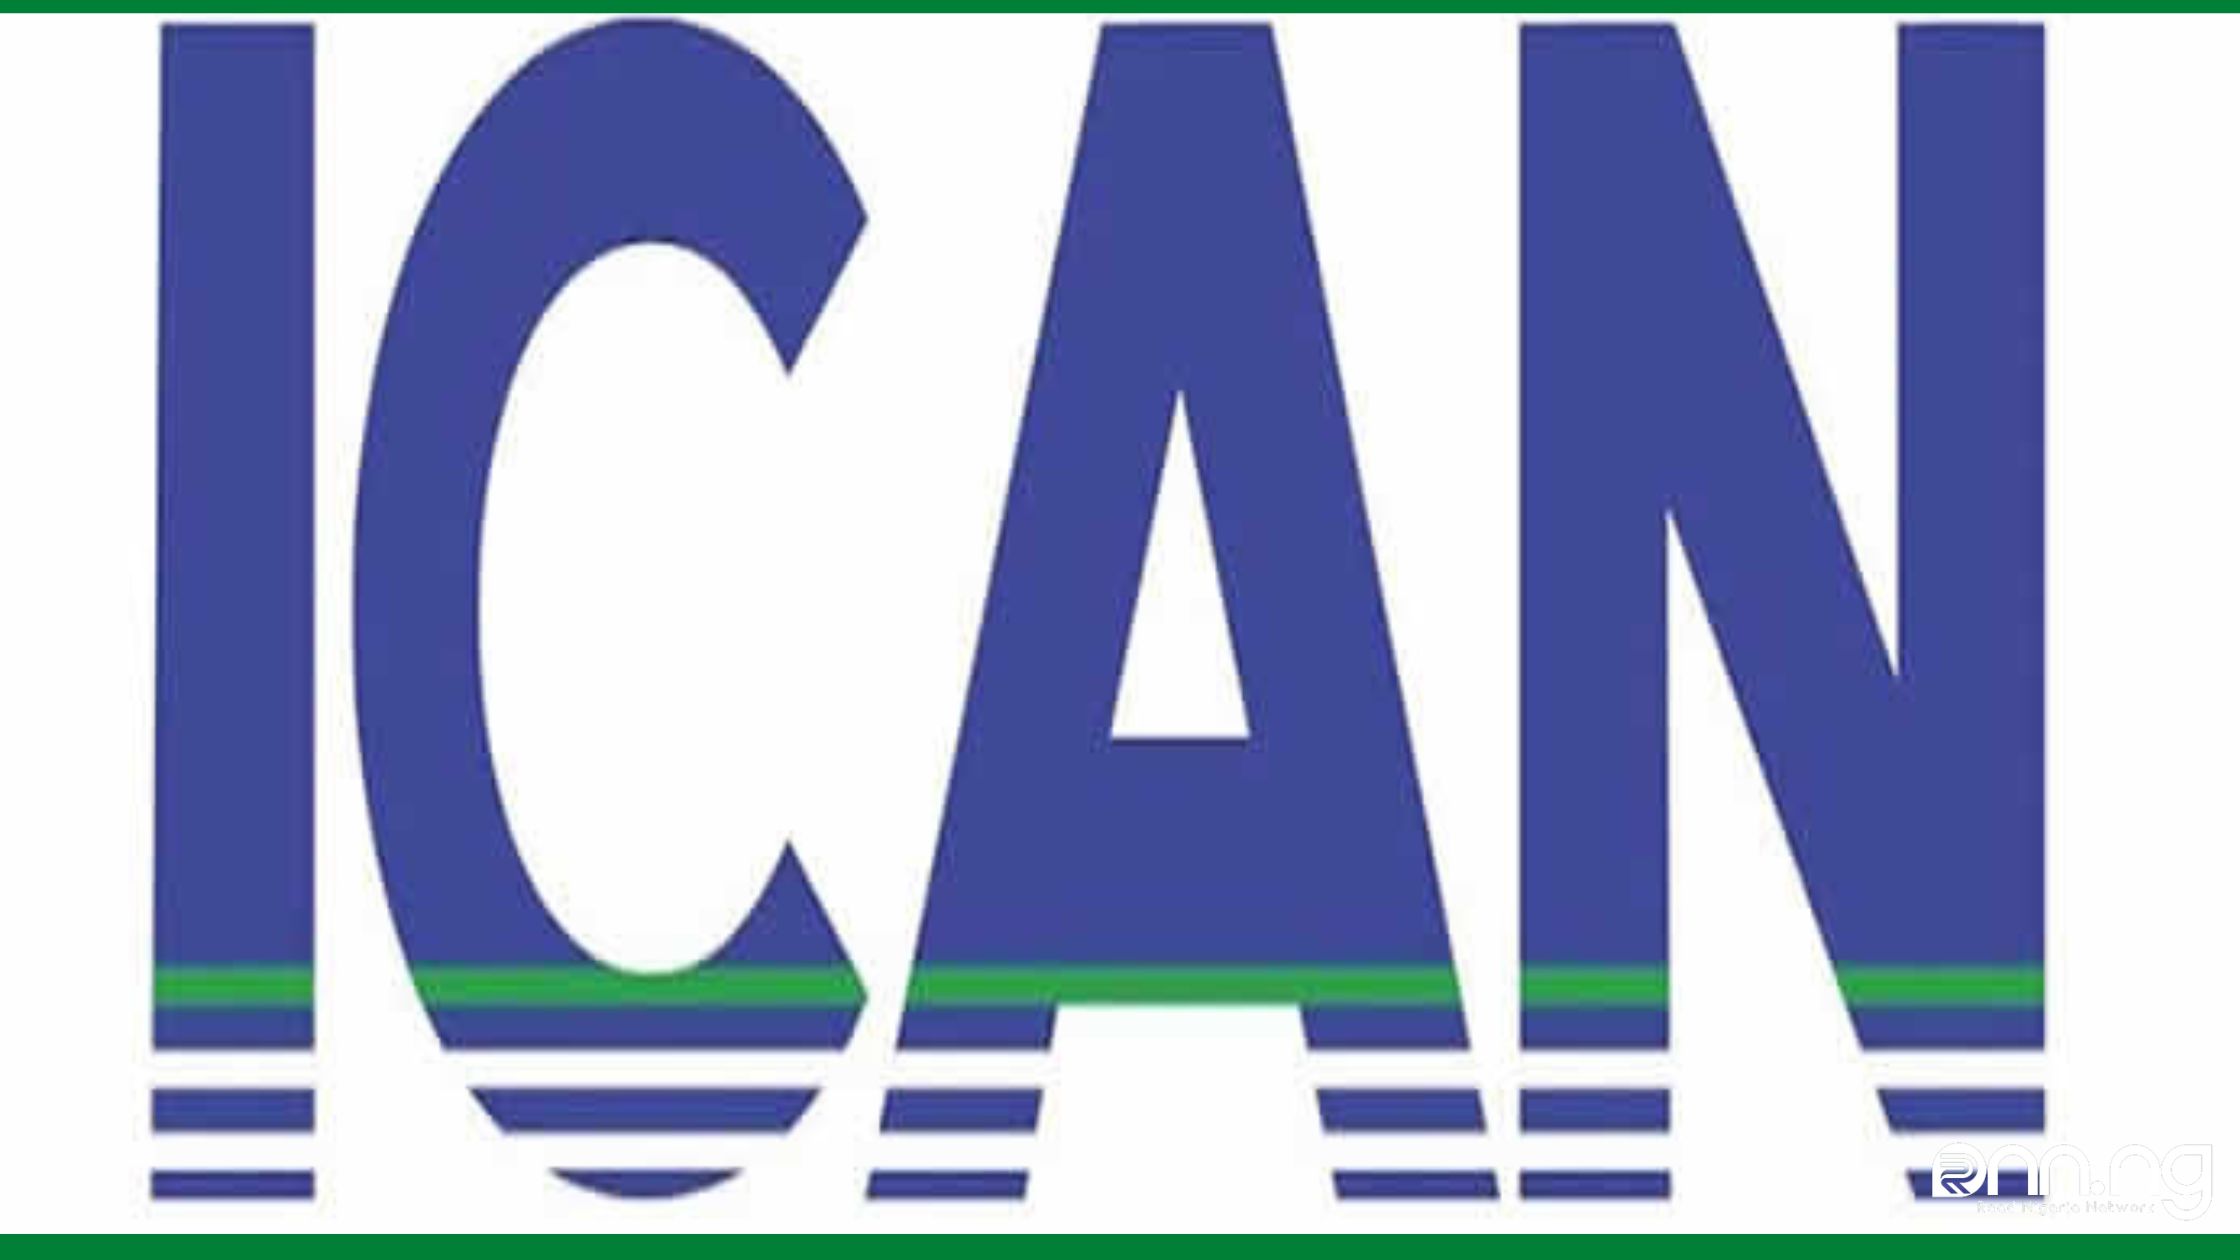 ICAN urges governments to harmonize taxation